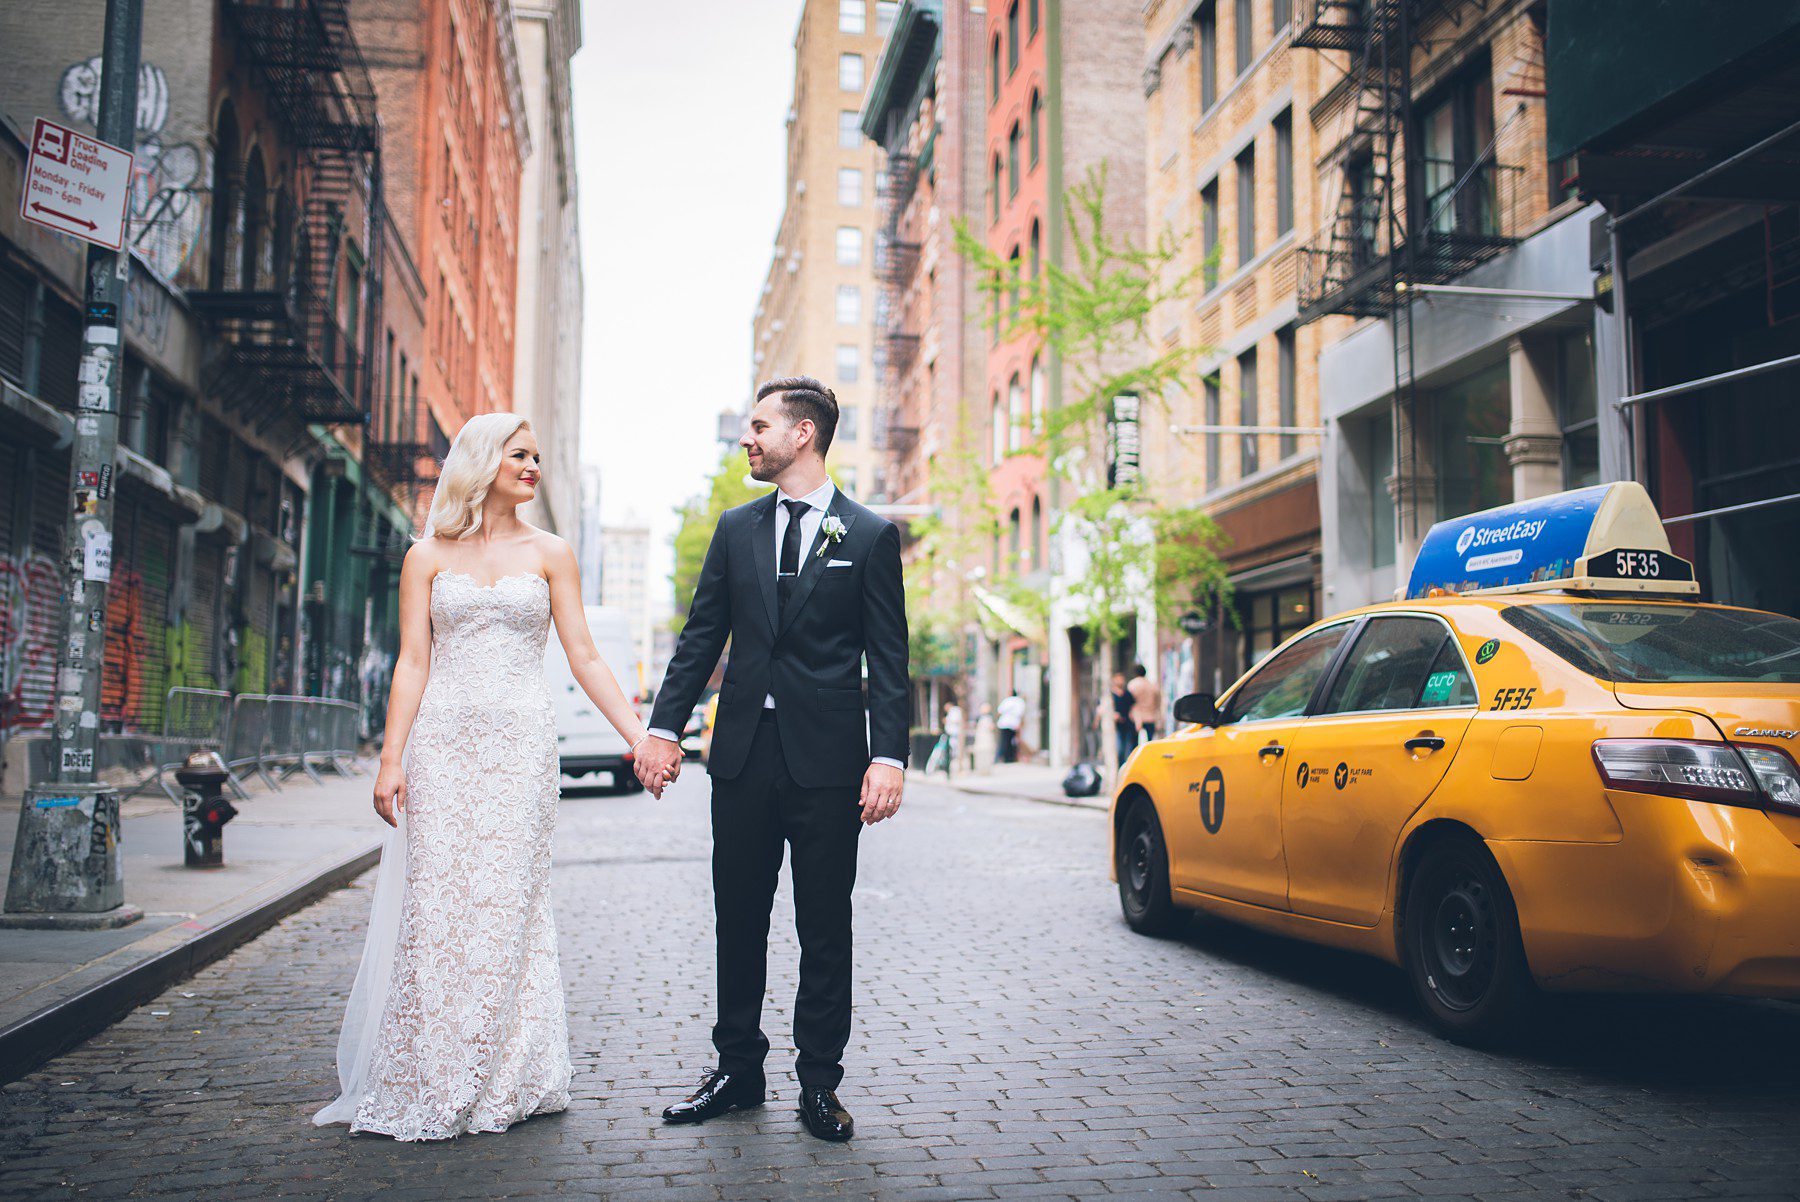 How To Get Married In New York Elope In Nyc Tips And Tricks,Large Diy Outdoor Christmas Decorations